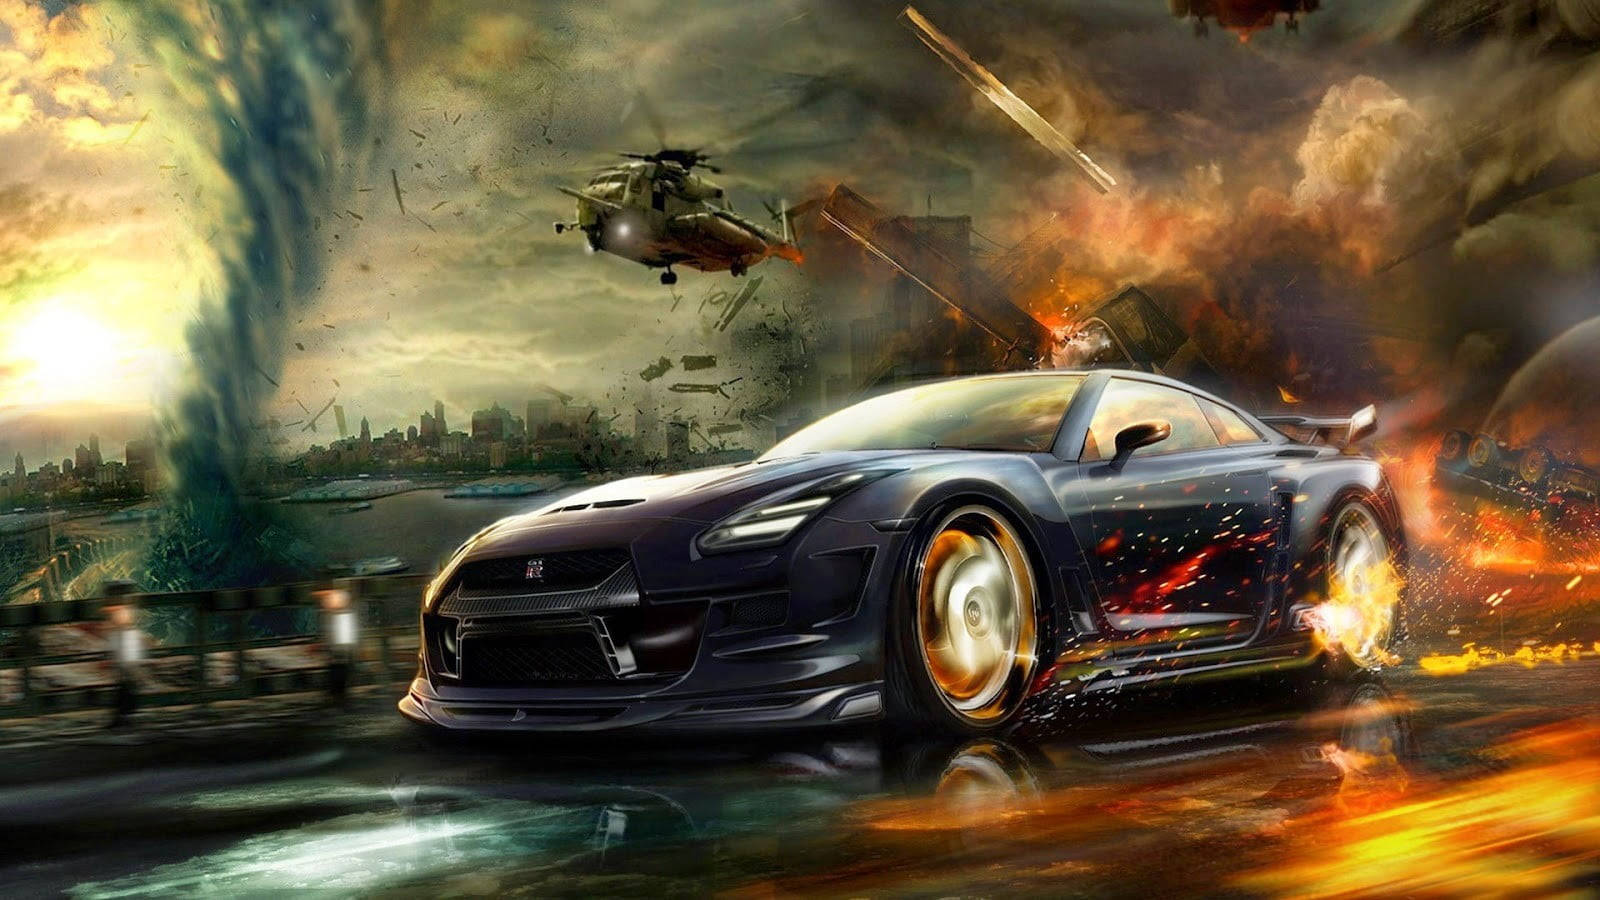 Fire Car Escaping Disaster Background